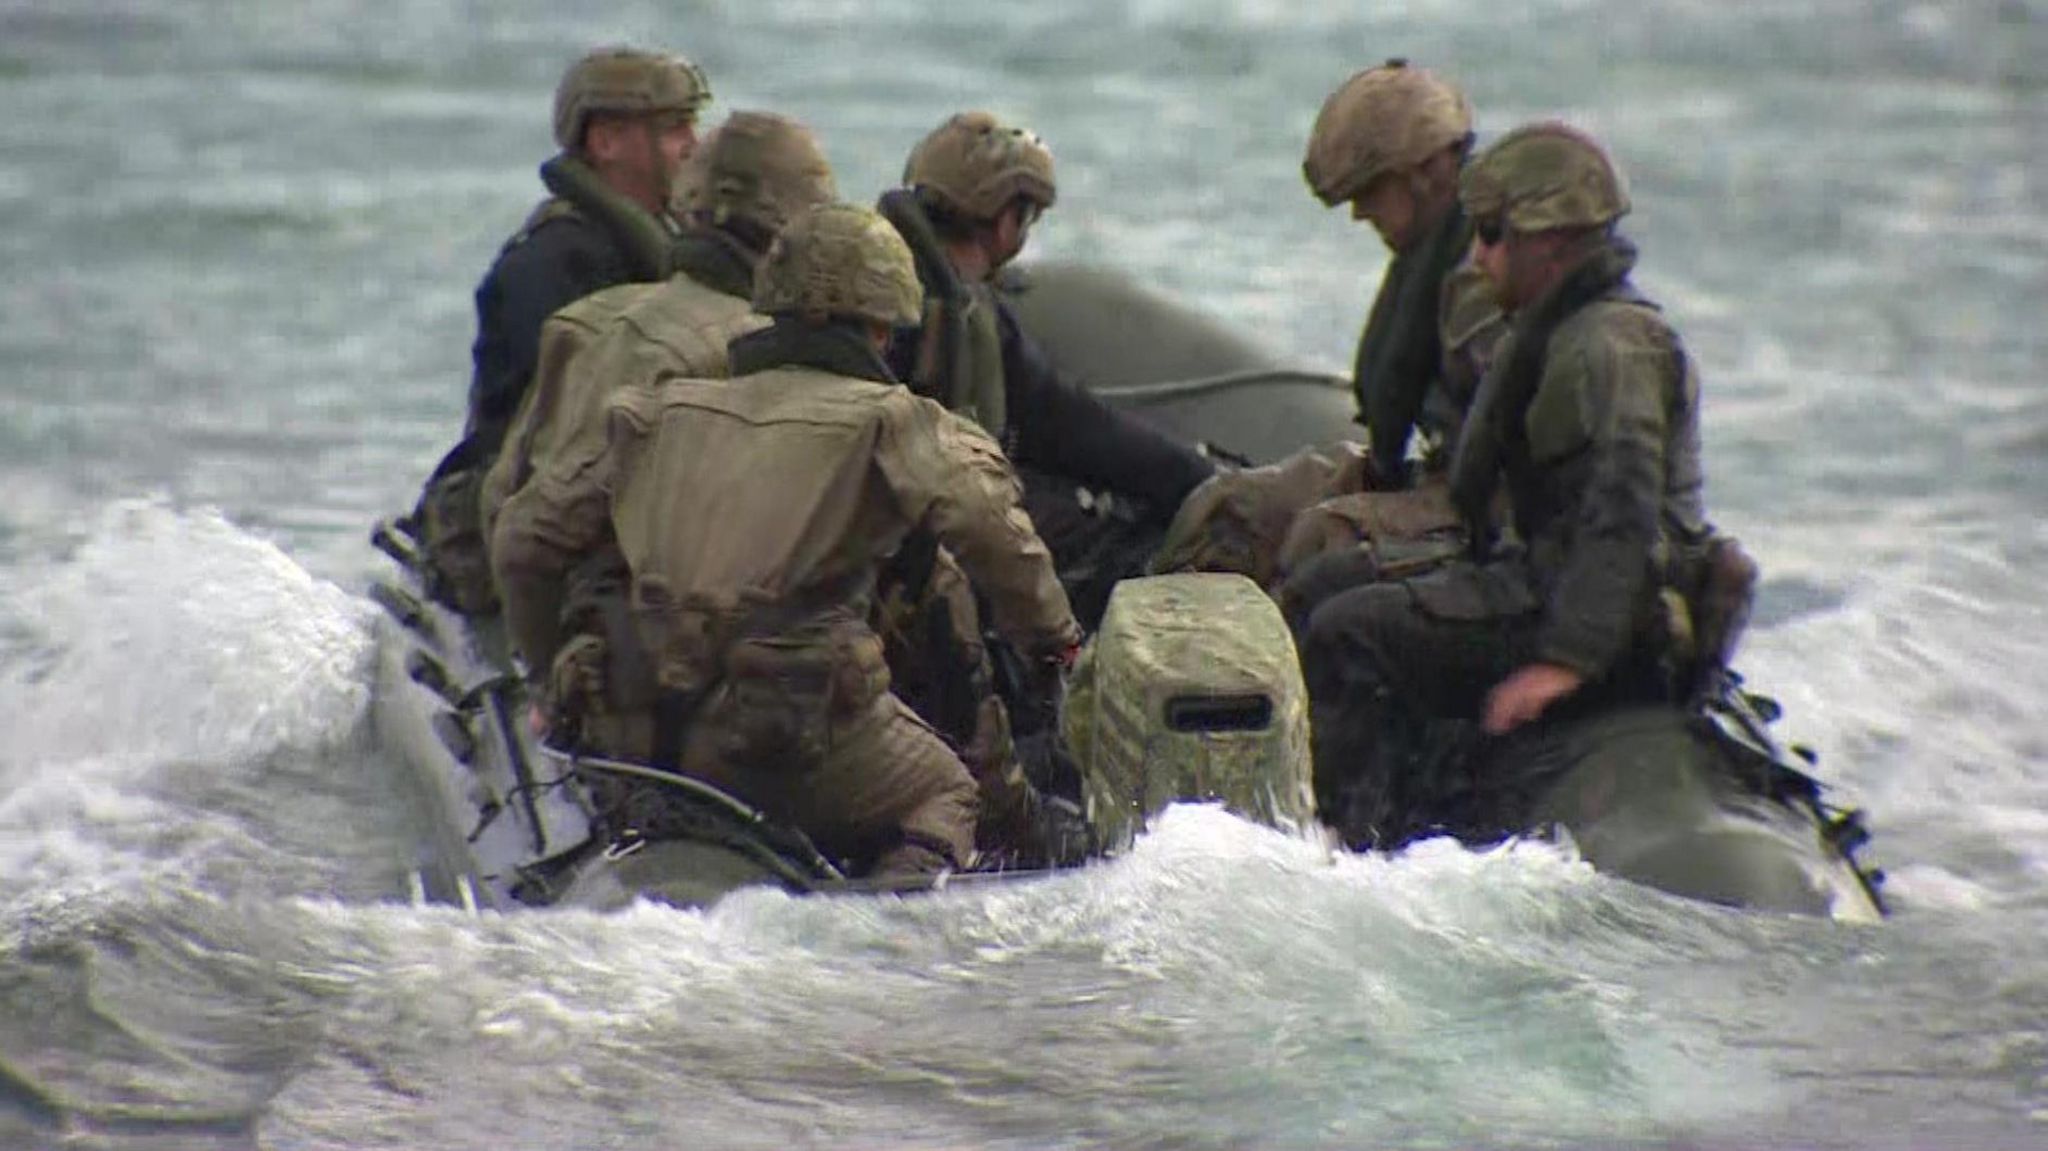 Six marines in a landing craft launching into the sea